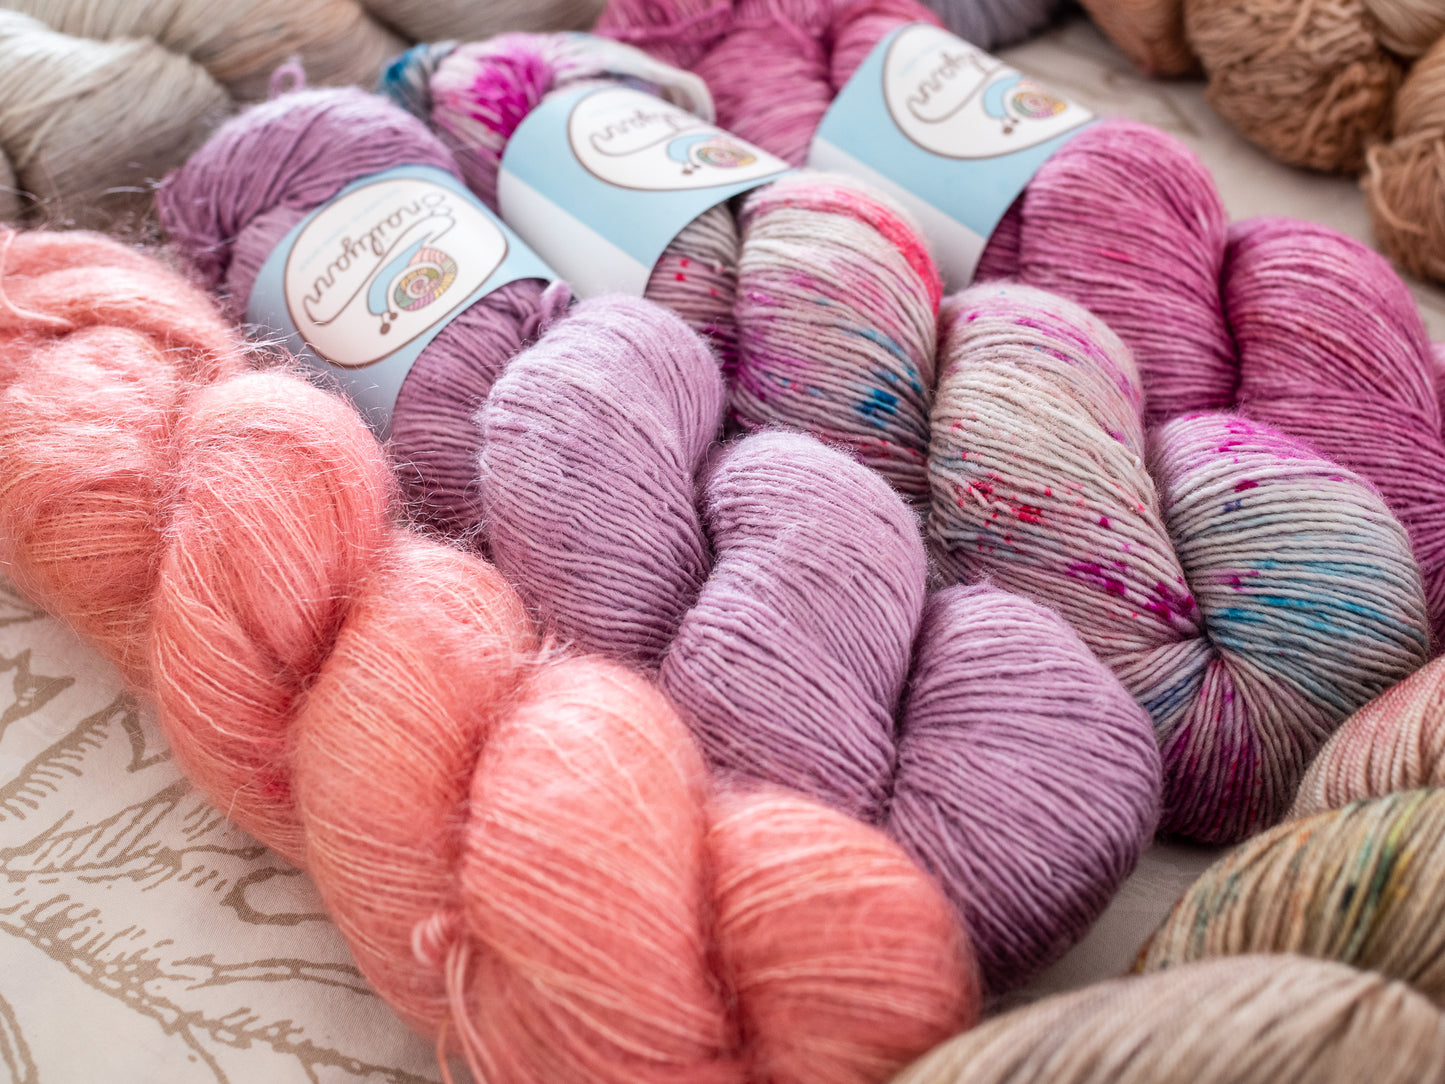 Shawl/Sweater Fade Bundle 19 - Pink lover - Fingering/Lace weight - 1500 Meters